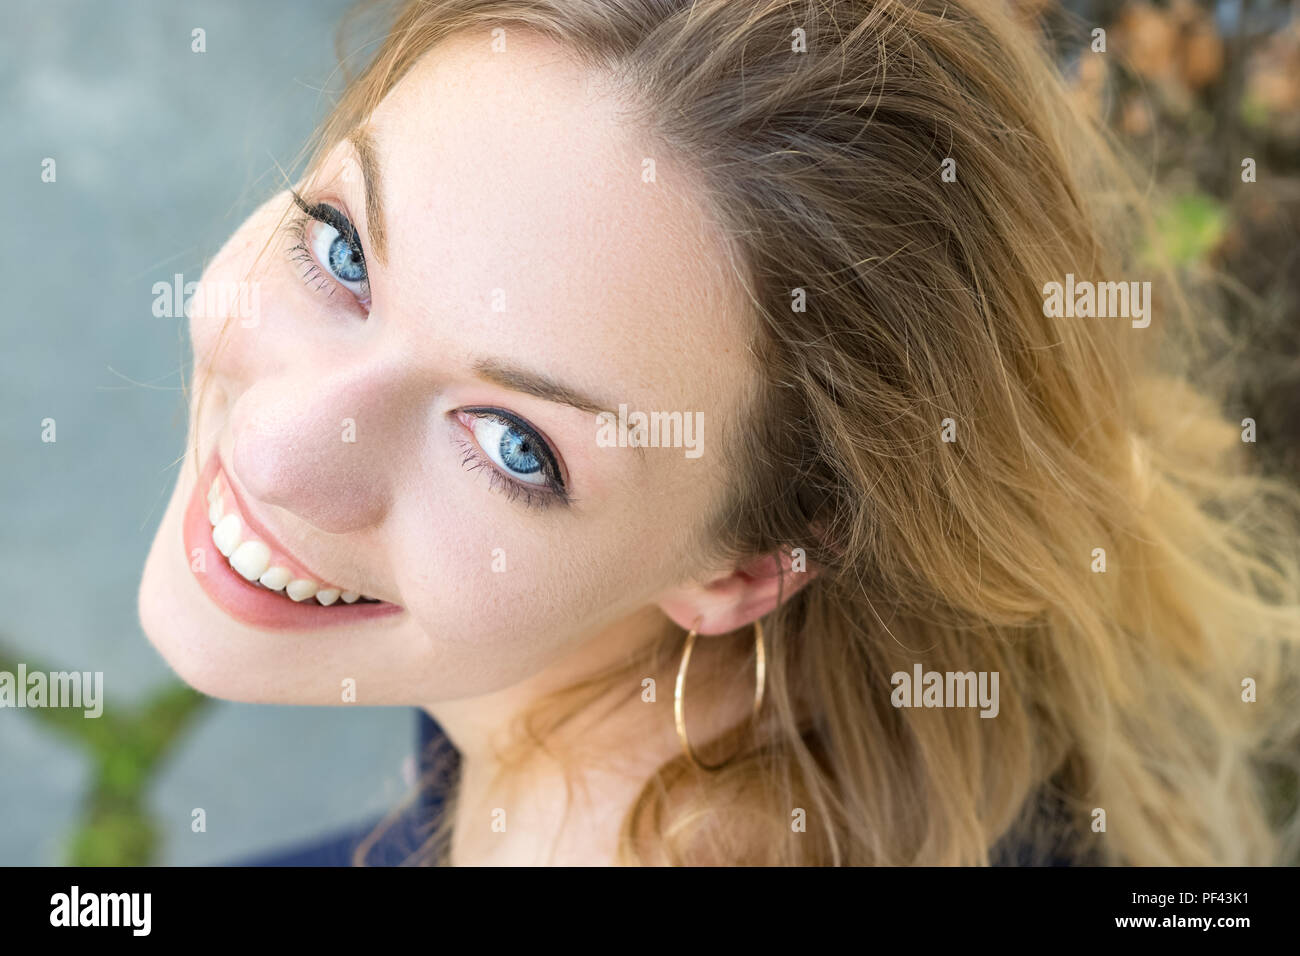 Portrait of an austrian young woman blonde with blue eyes looking up, toothy smile, healthy teeth. Stock Photo